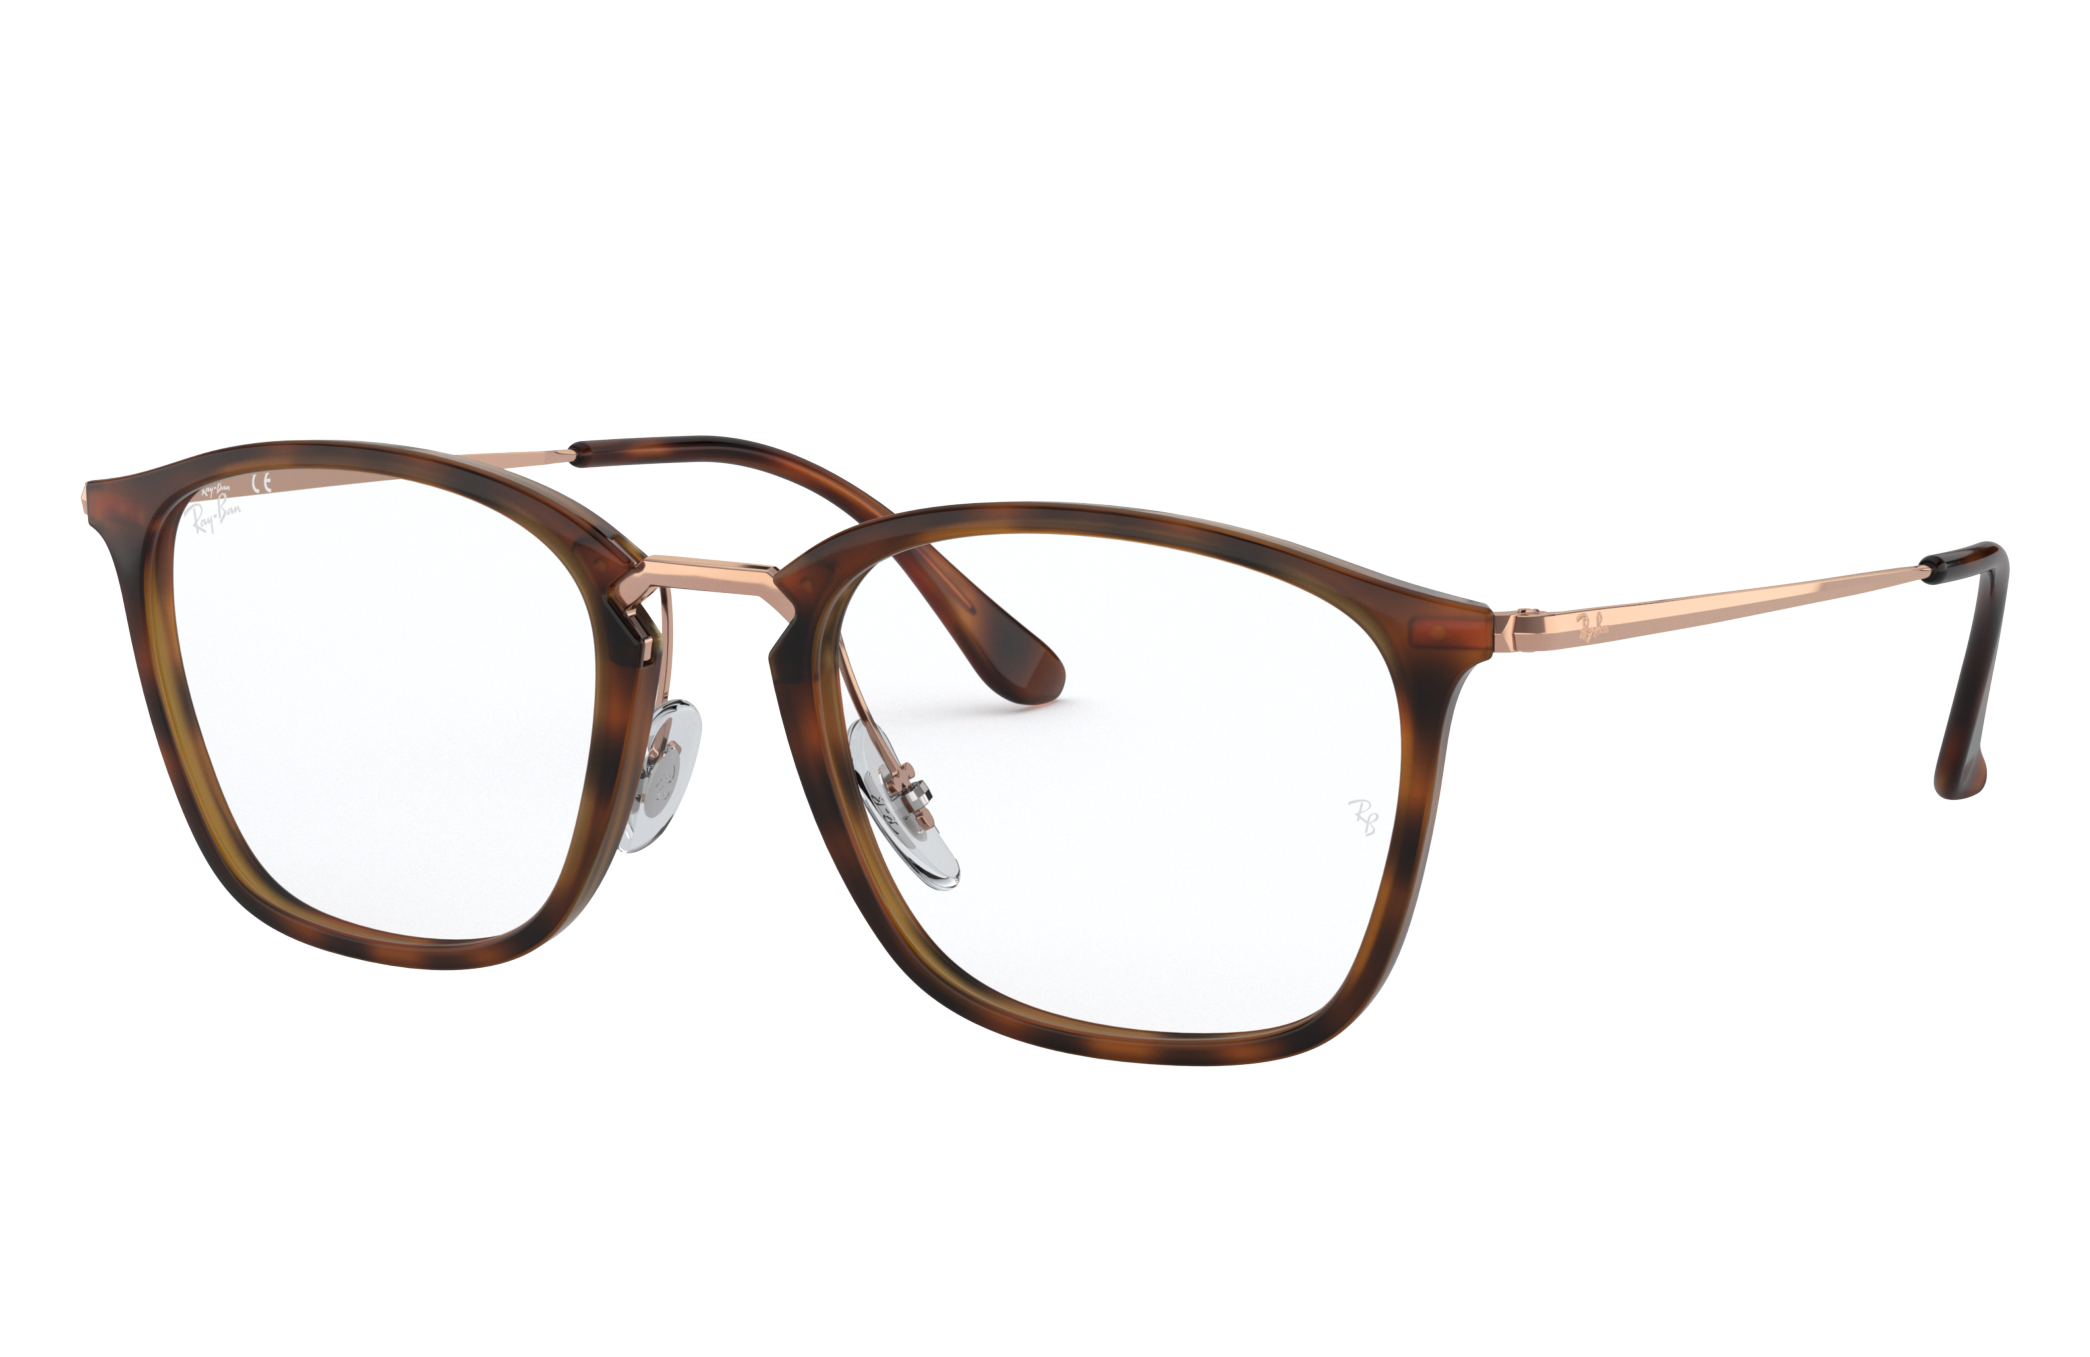 Rb7164 Eyeglasses with Striped Havana Frame - RB7164 | Ray-Ban®